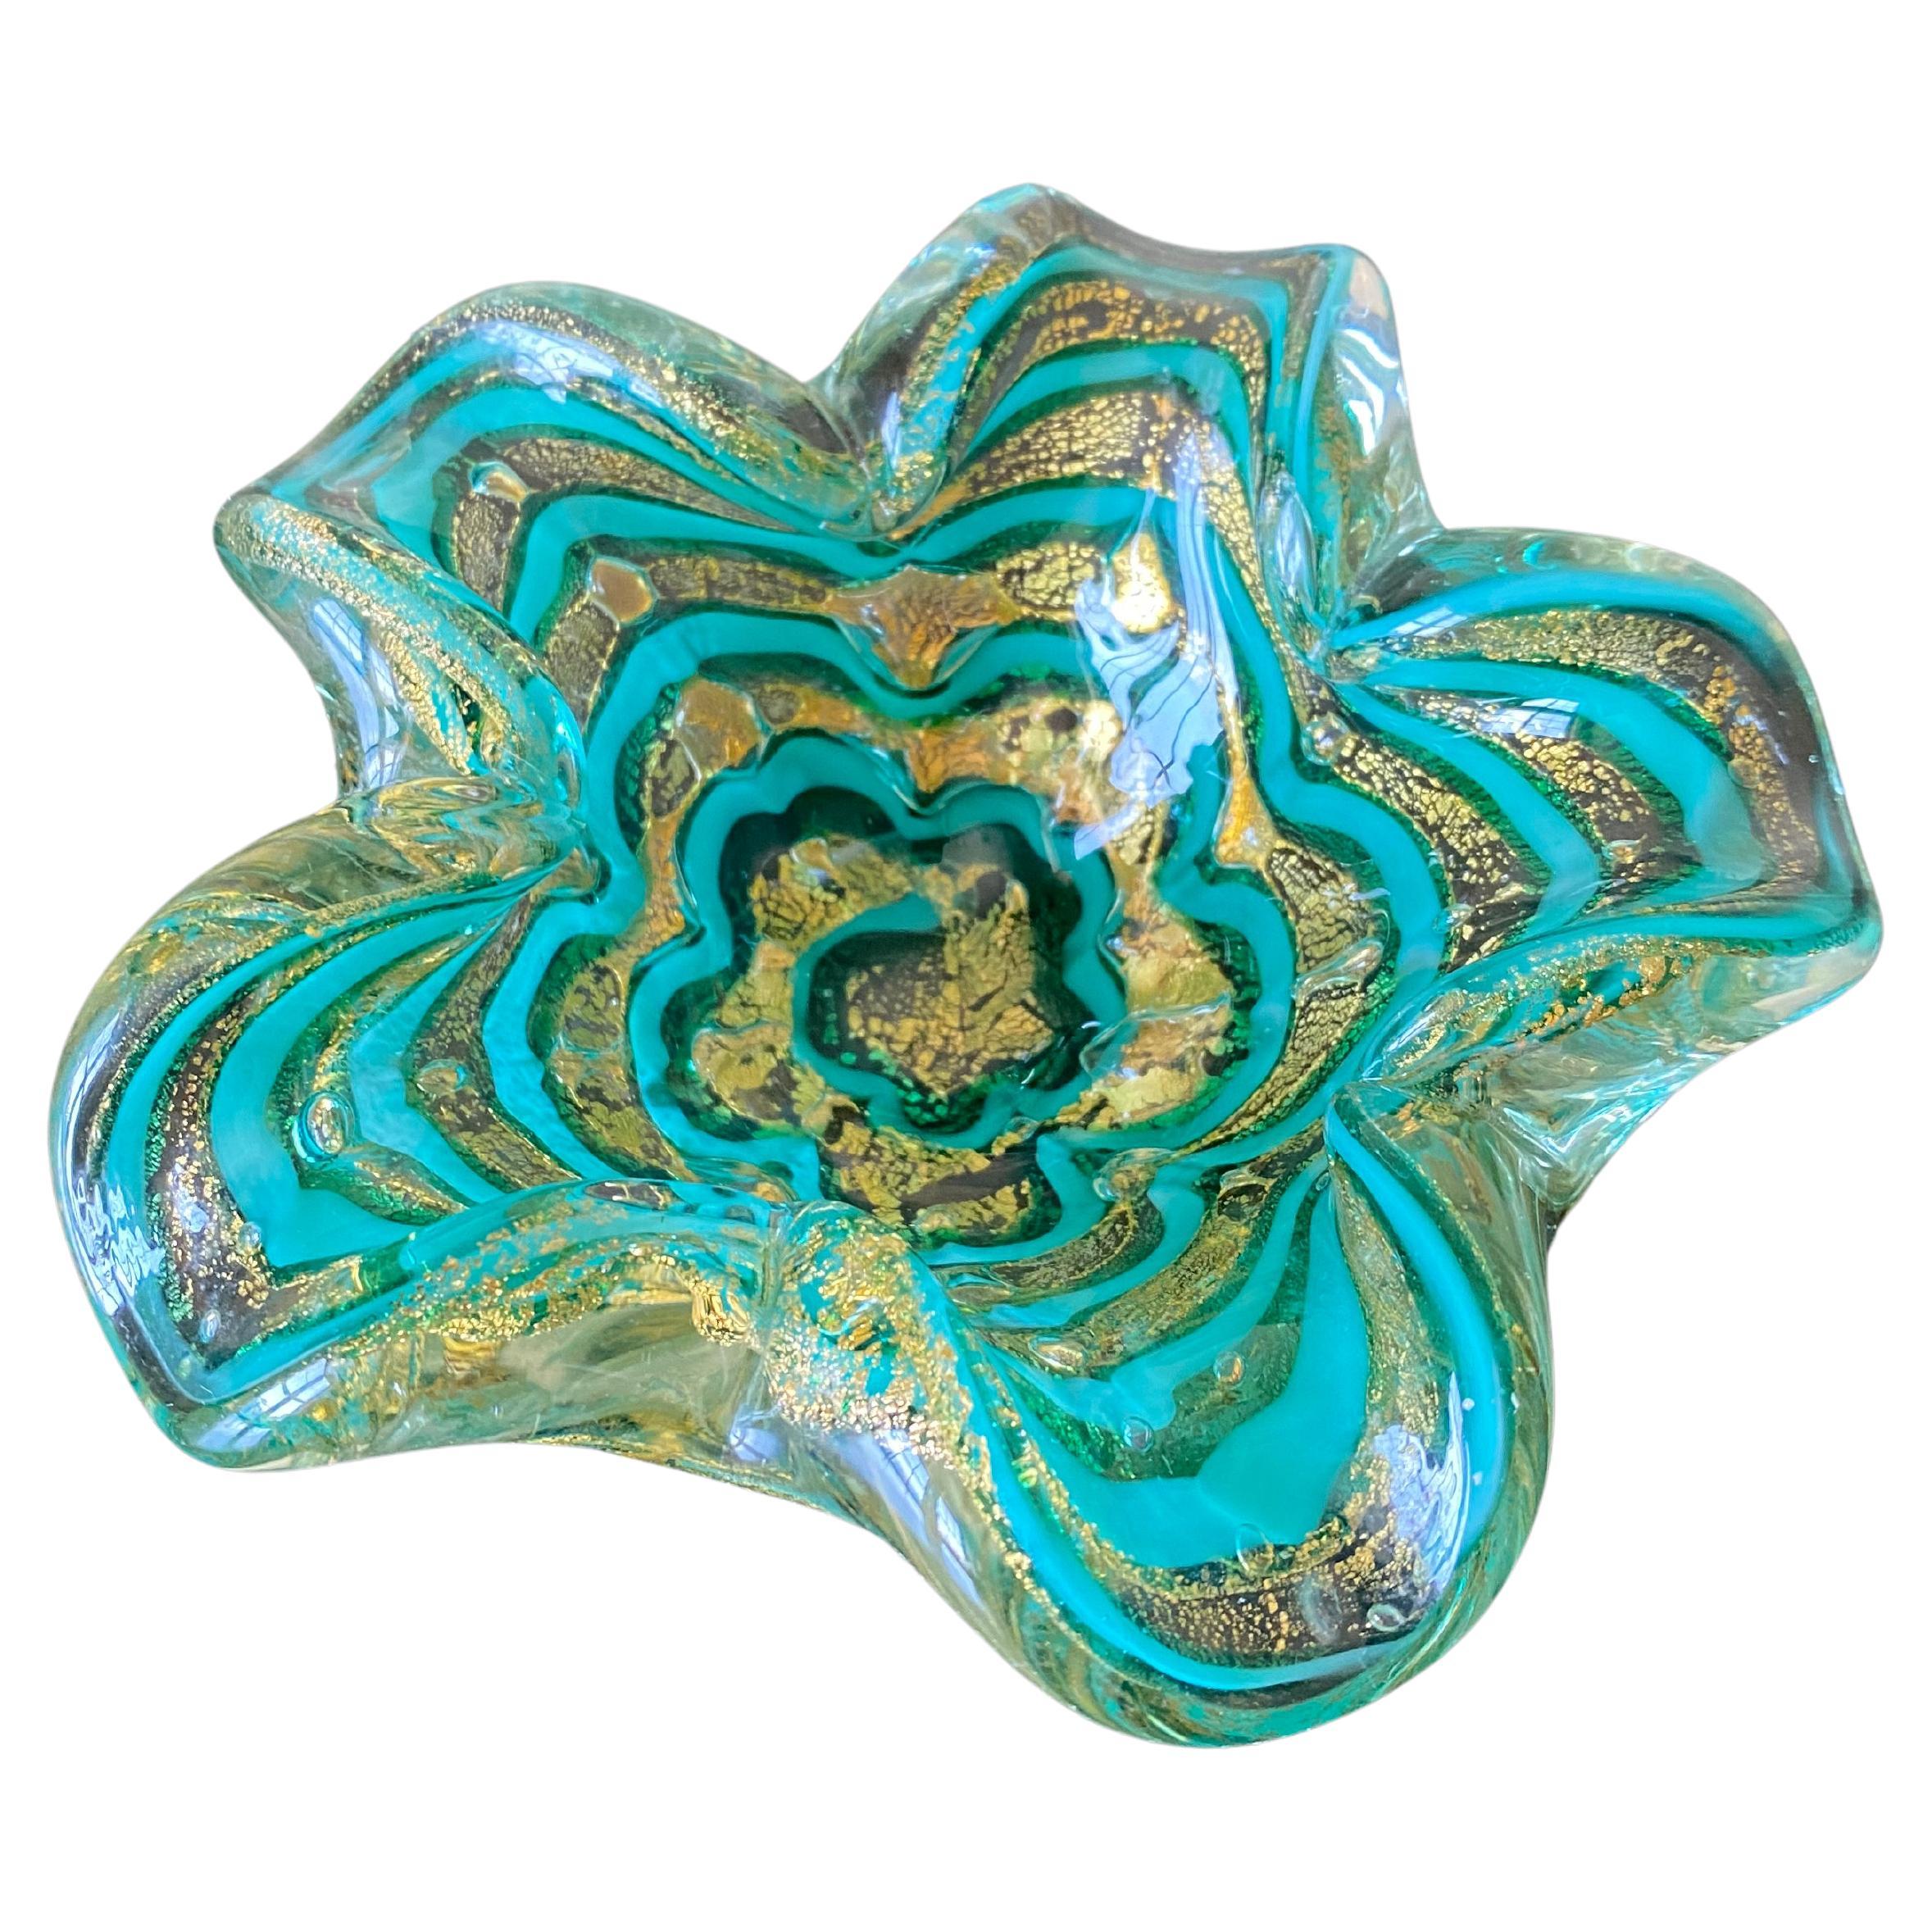 Barovier Toso Green & Gold Striped Murano Glass Bowl For Sale